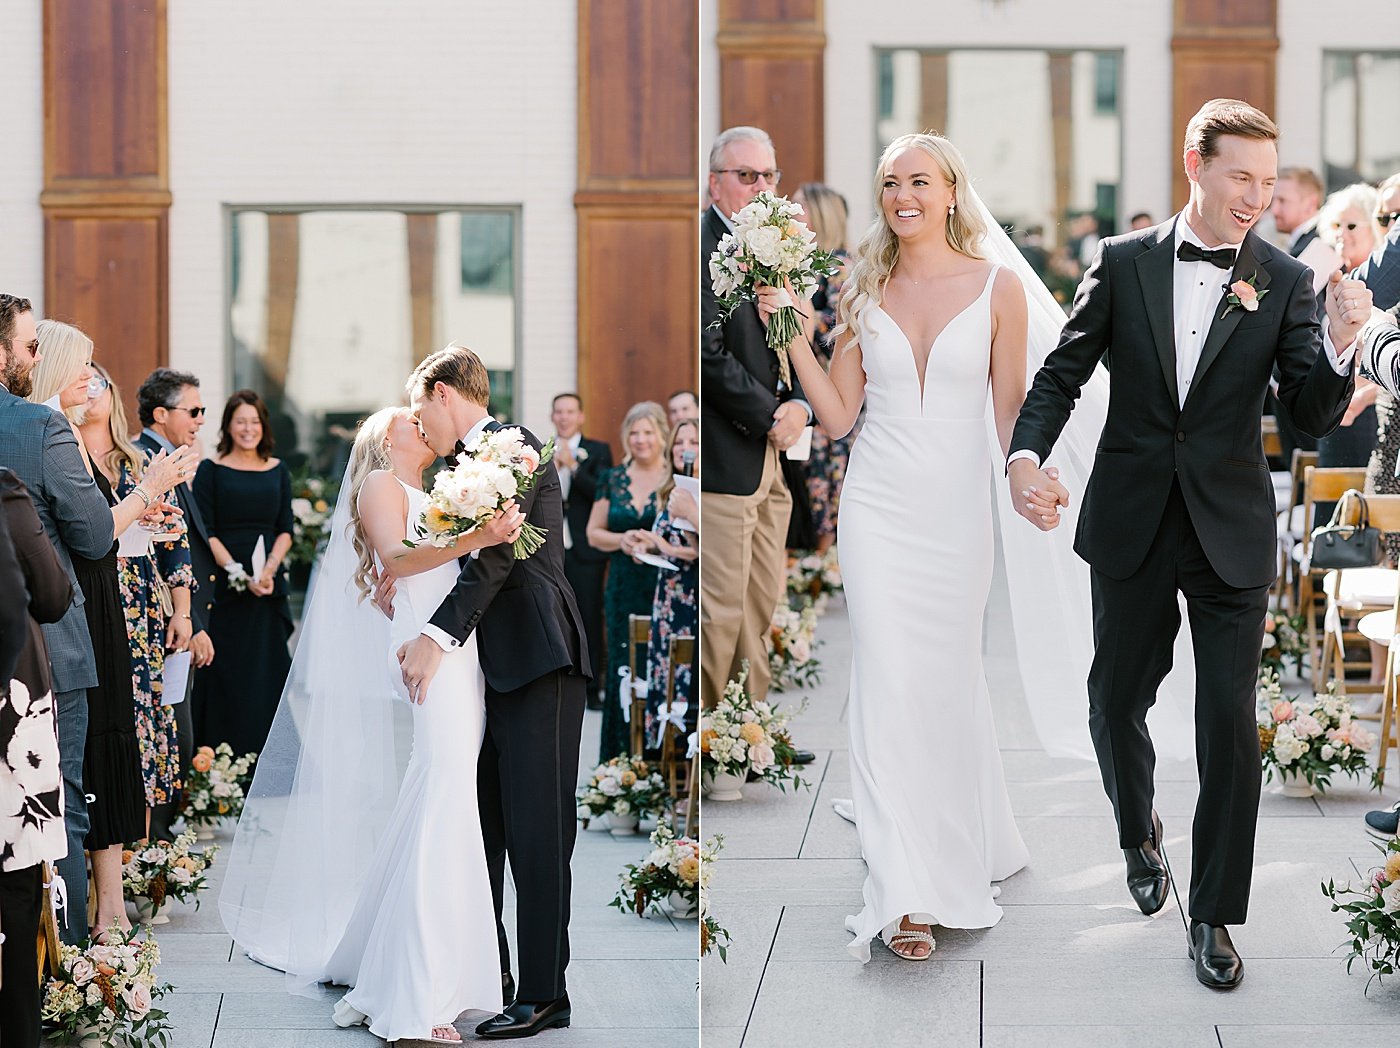 Rebecca Shehorn Photography Haley and Will's Bottleworks Indy Hotel Wedding-558.jpg